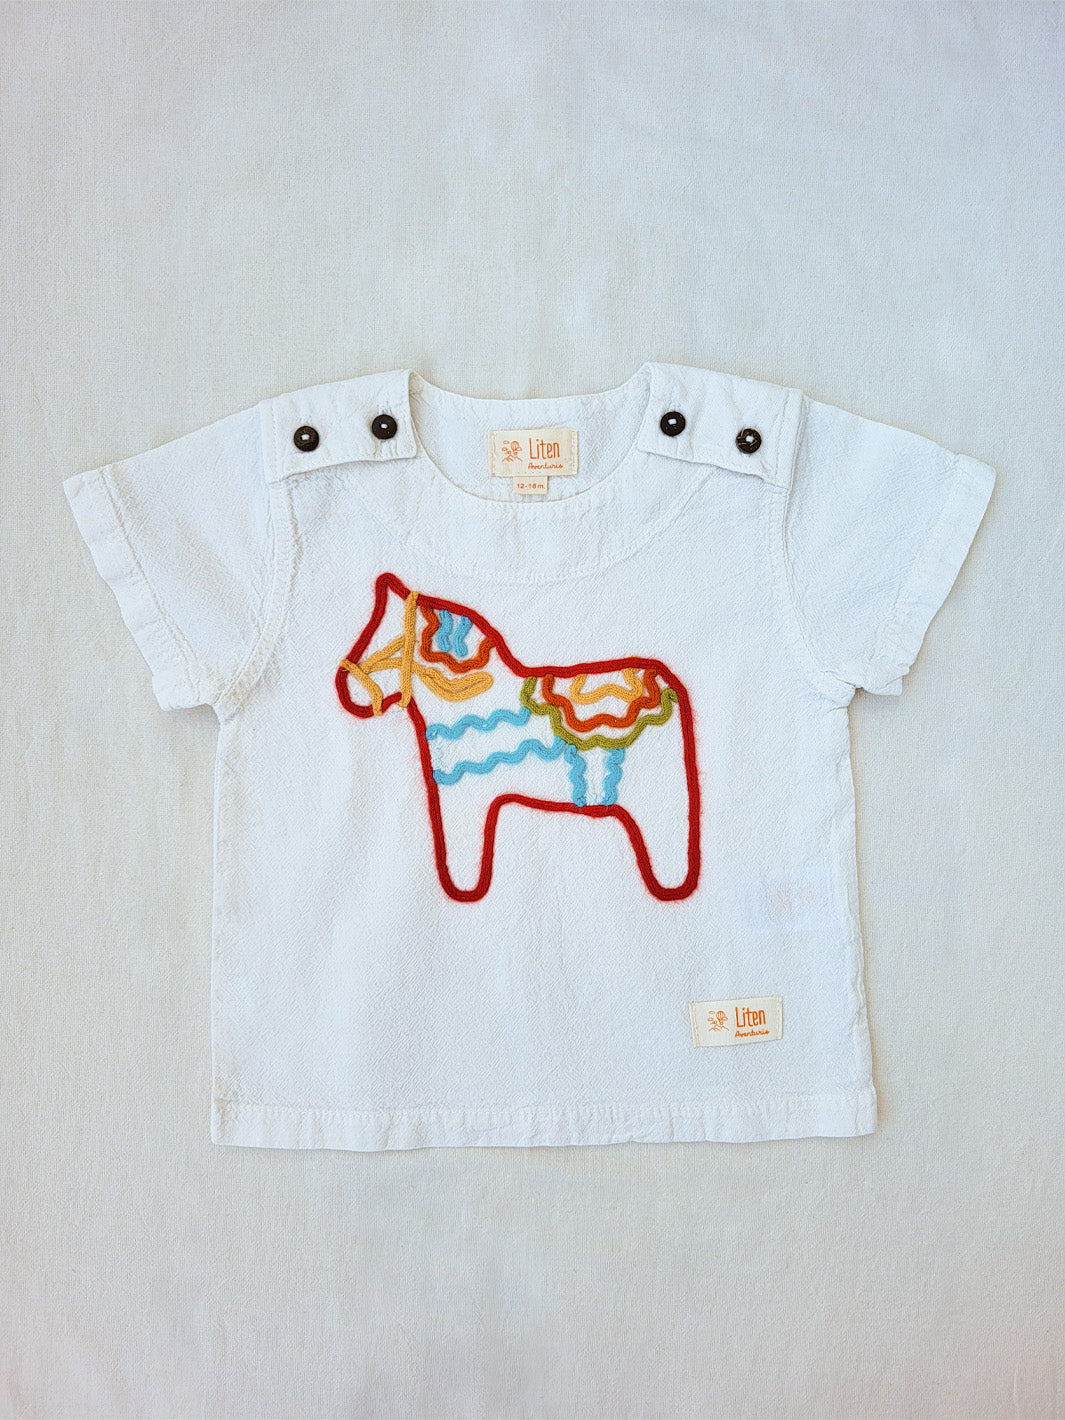 Dala white T-shirt made of natural cotton, with beautifully embroidered symbolic horse | Pojken och flickan tröja